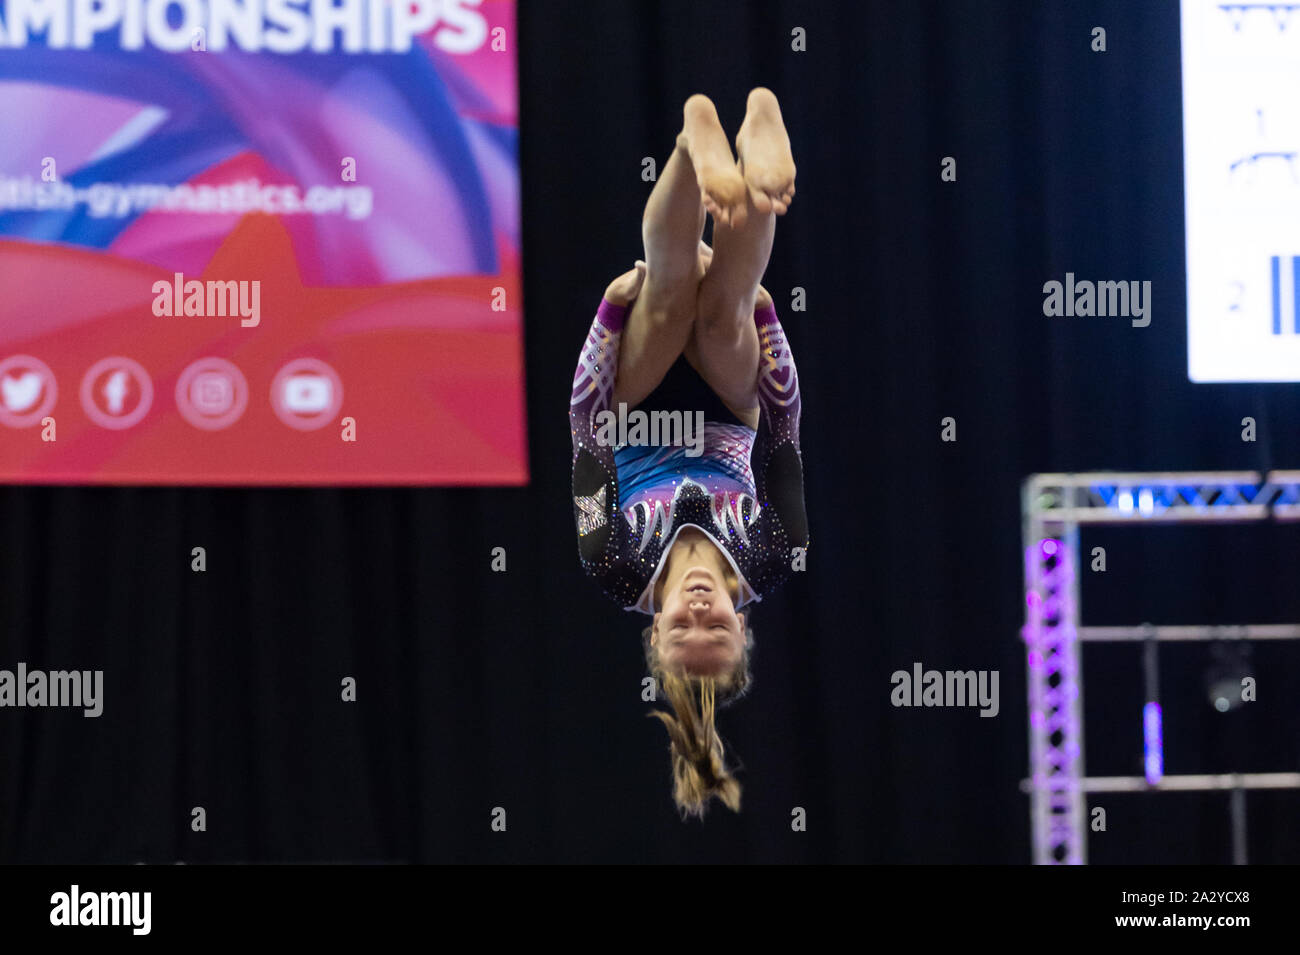 Birmingham, England, UK. 28 September 2019. Ruby Reid (Revolution Gymnastics Club) in action during the Trampoline, Tumbling and DMT British Championship Qualifiers at the Arena Birmingham, Birmingham, UK. Stock Photo